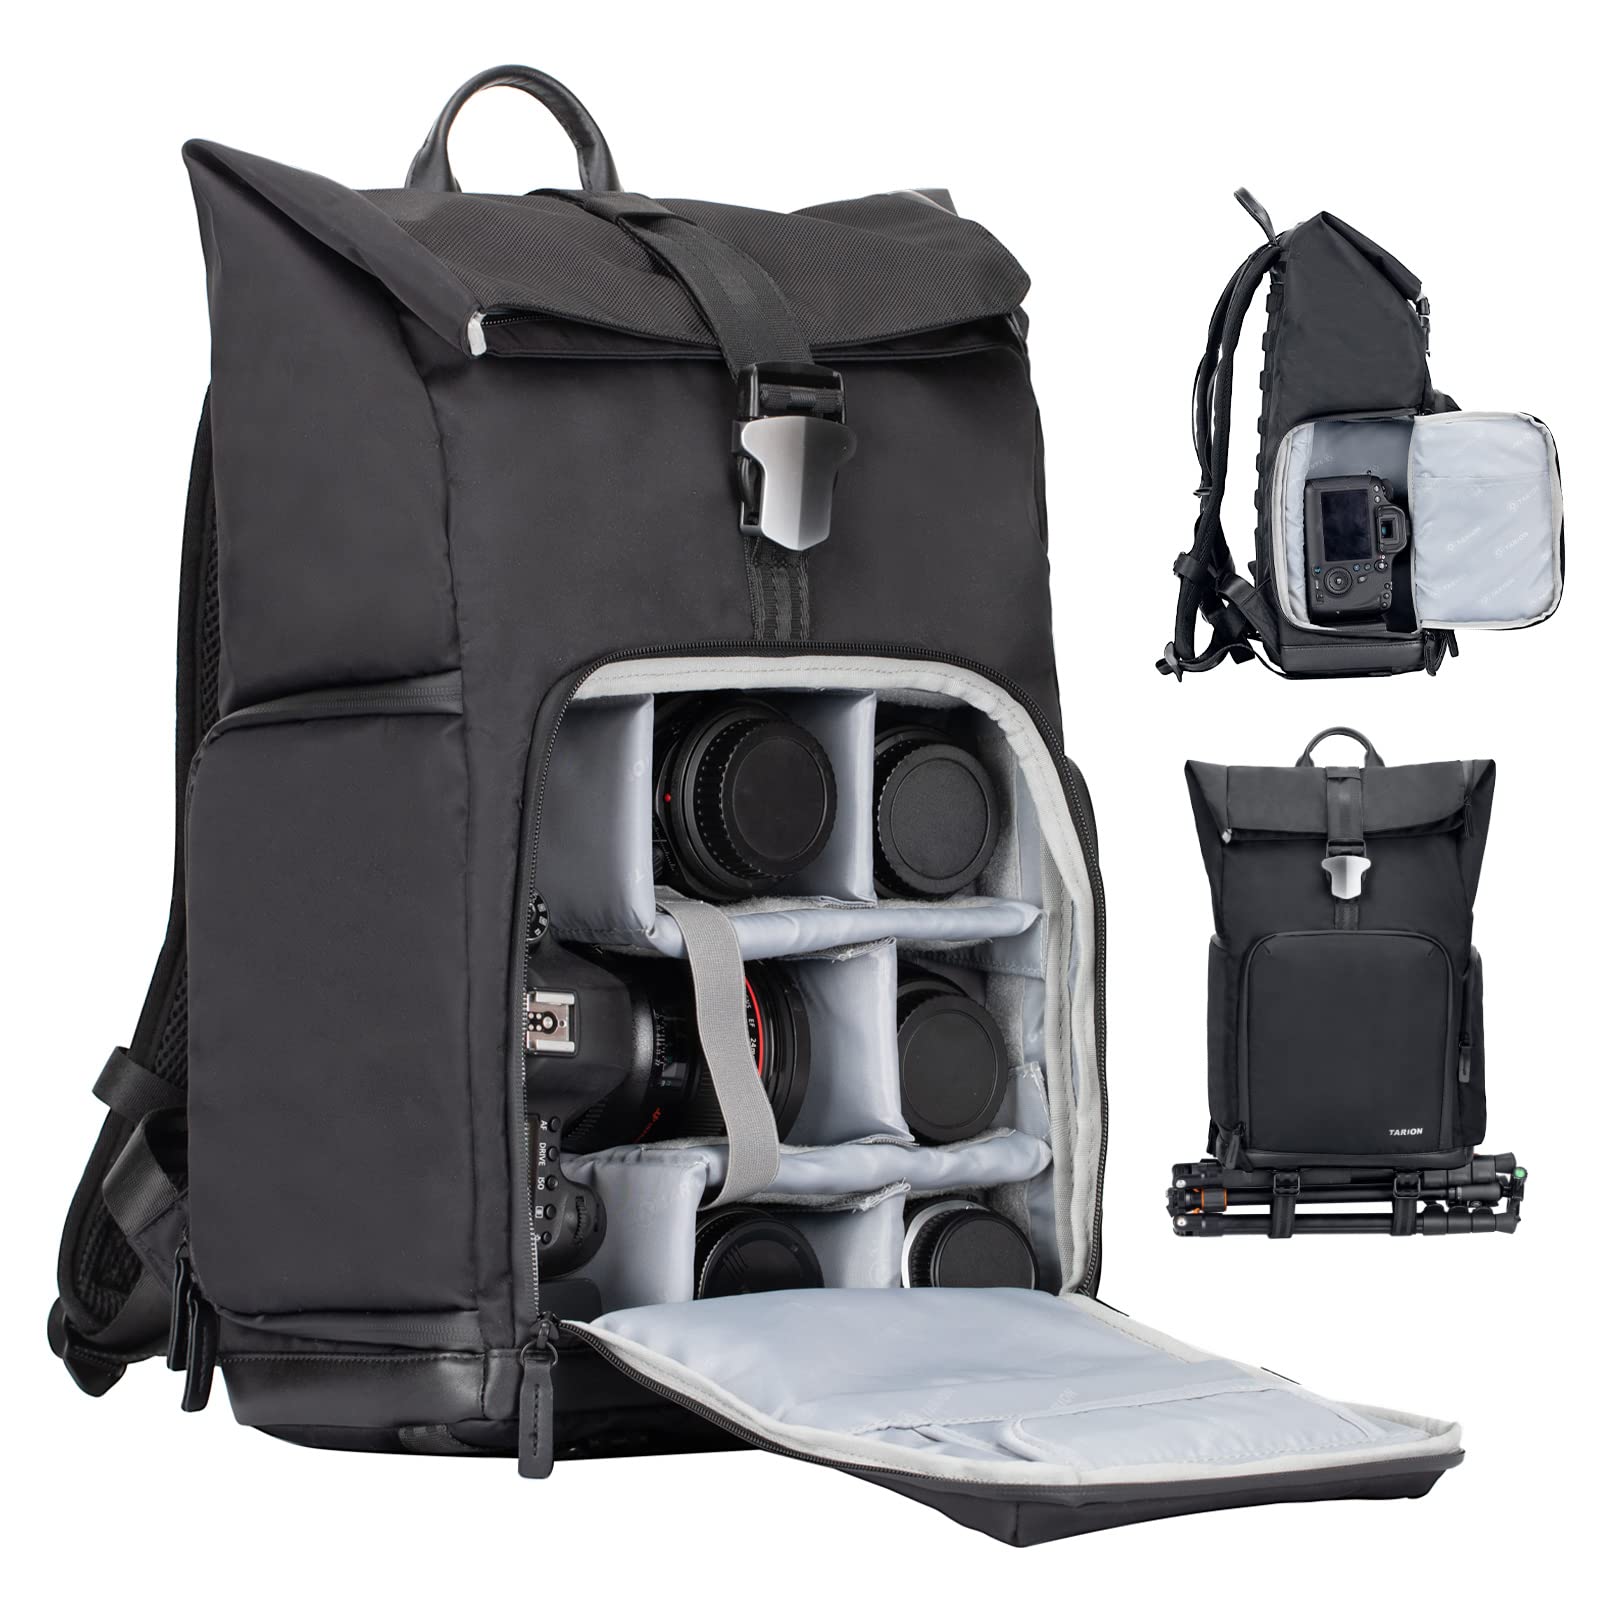 12 Best Charging Backpacks - Built In Charger, USB Charging Port and more |  Backpackies